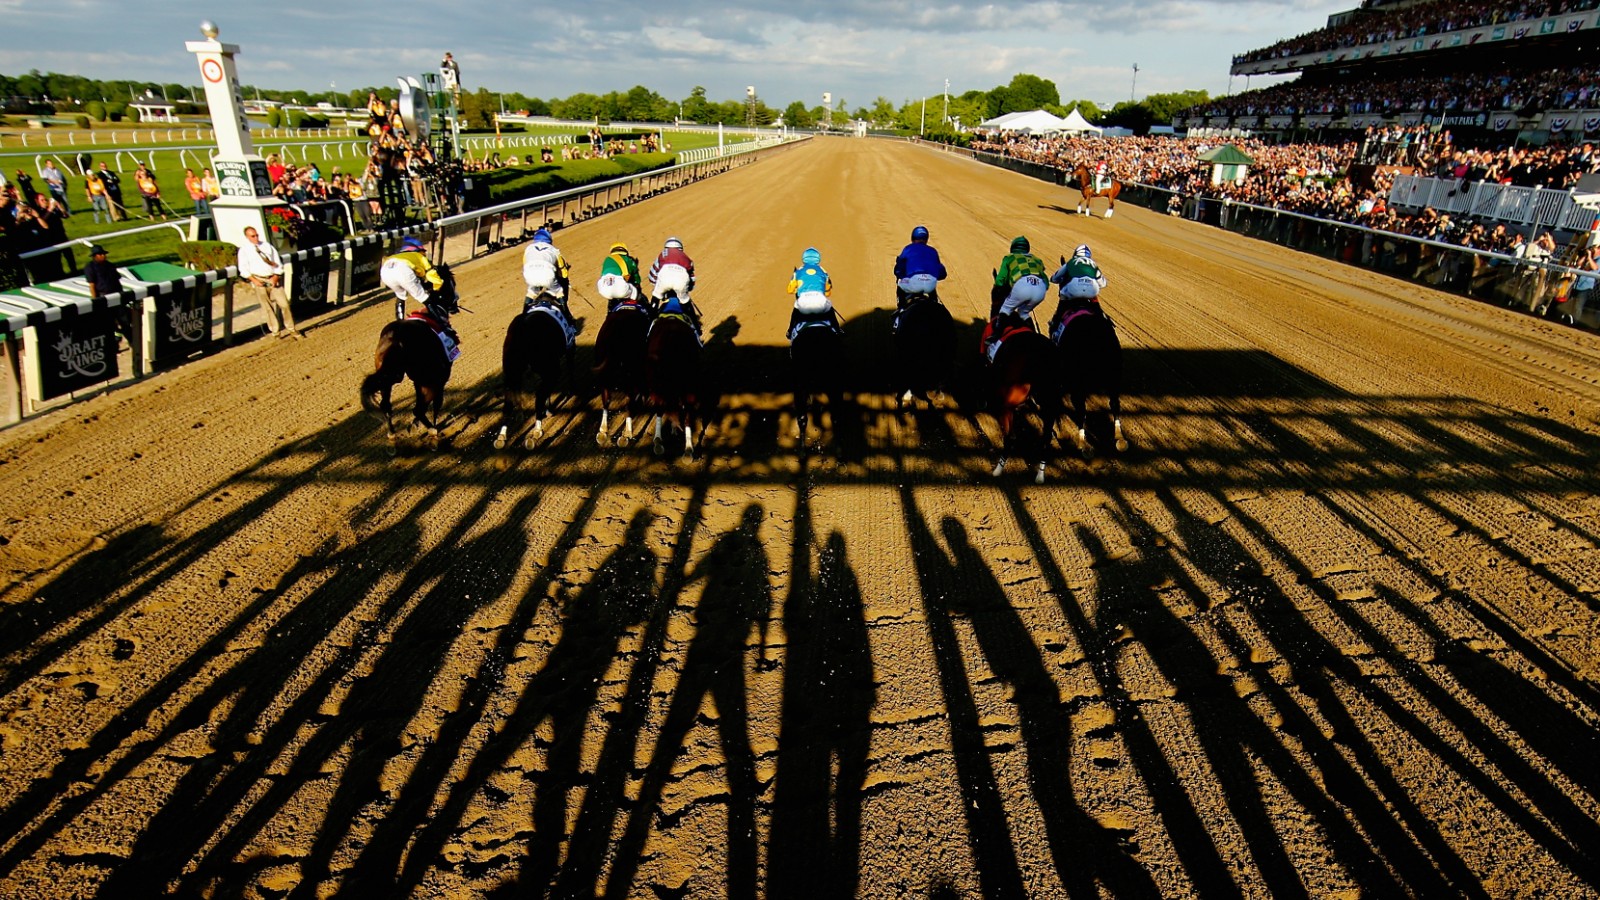 The Belmont Stakes history in the making? CNN Video